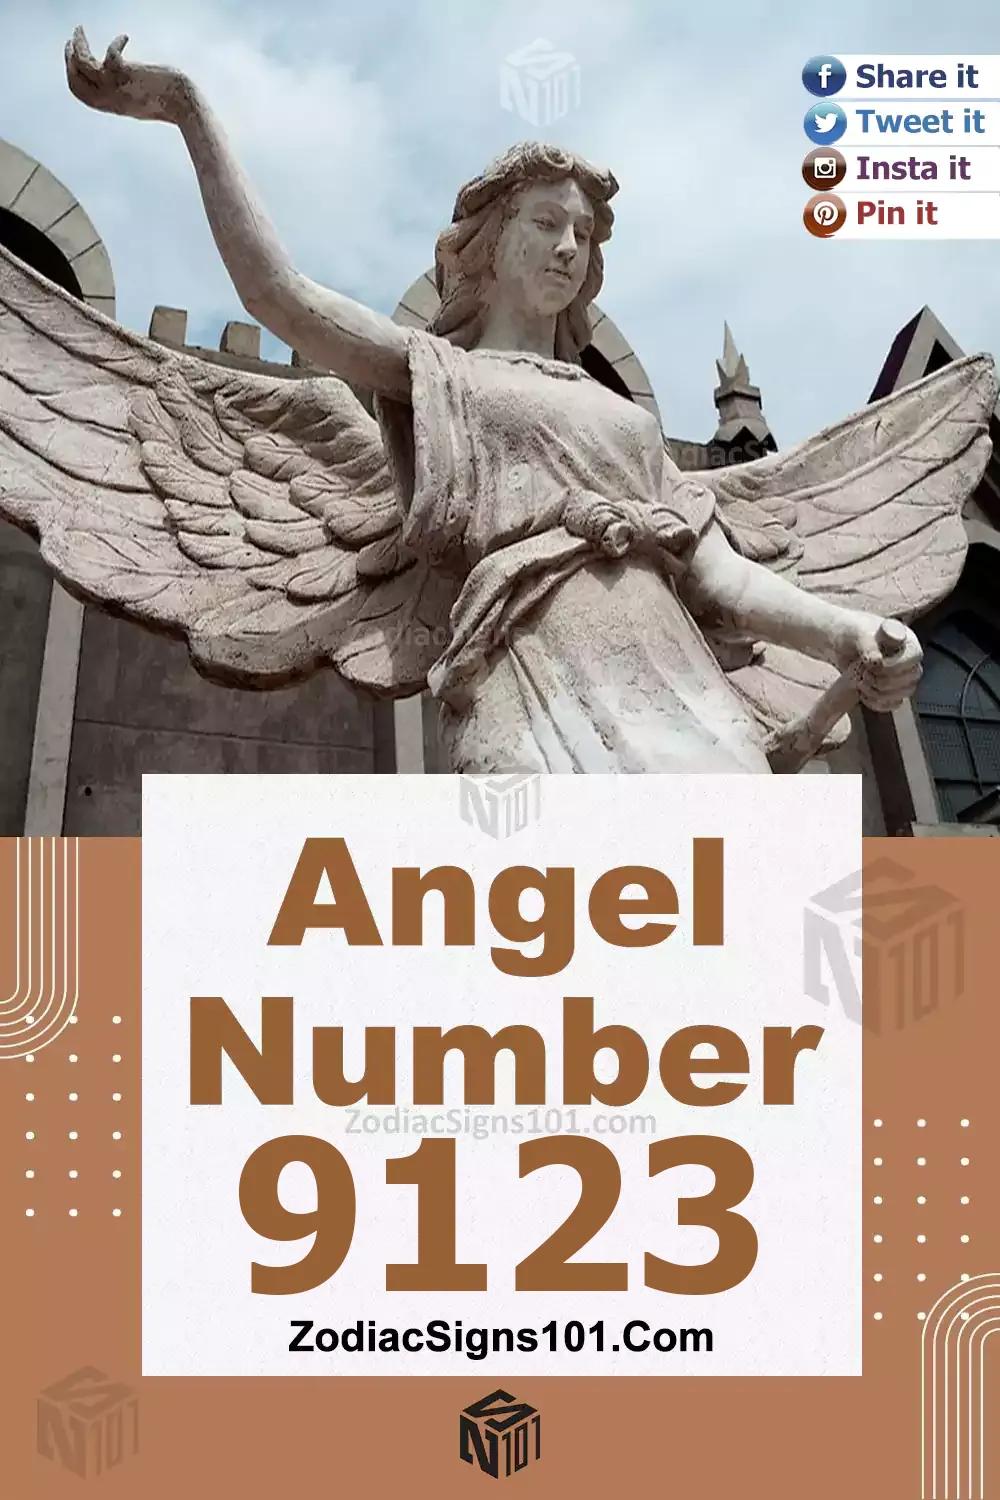 9123 Angel Number Meaning